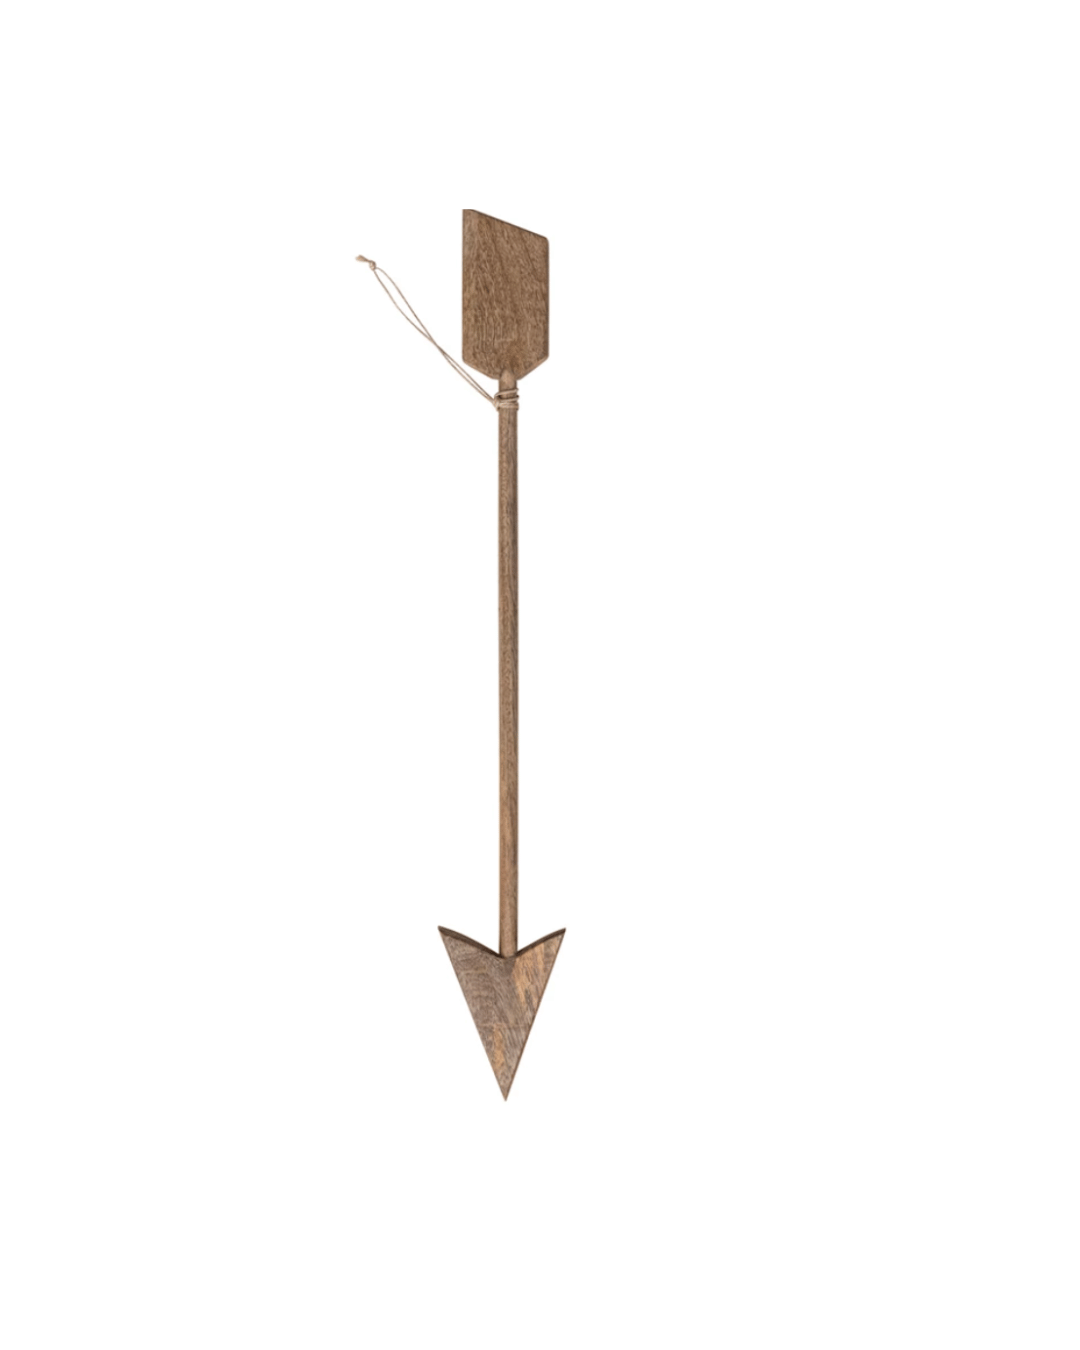 A vertical, textured Creative Co-op mango arrow sculpture with a square top and sharp pointed bottom, depicting the arrow pointing downward.